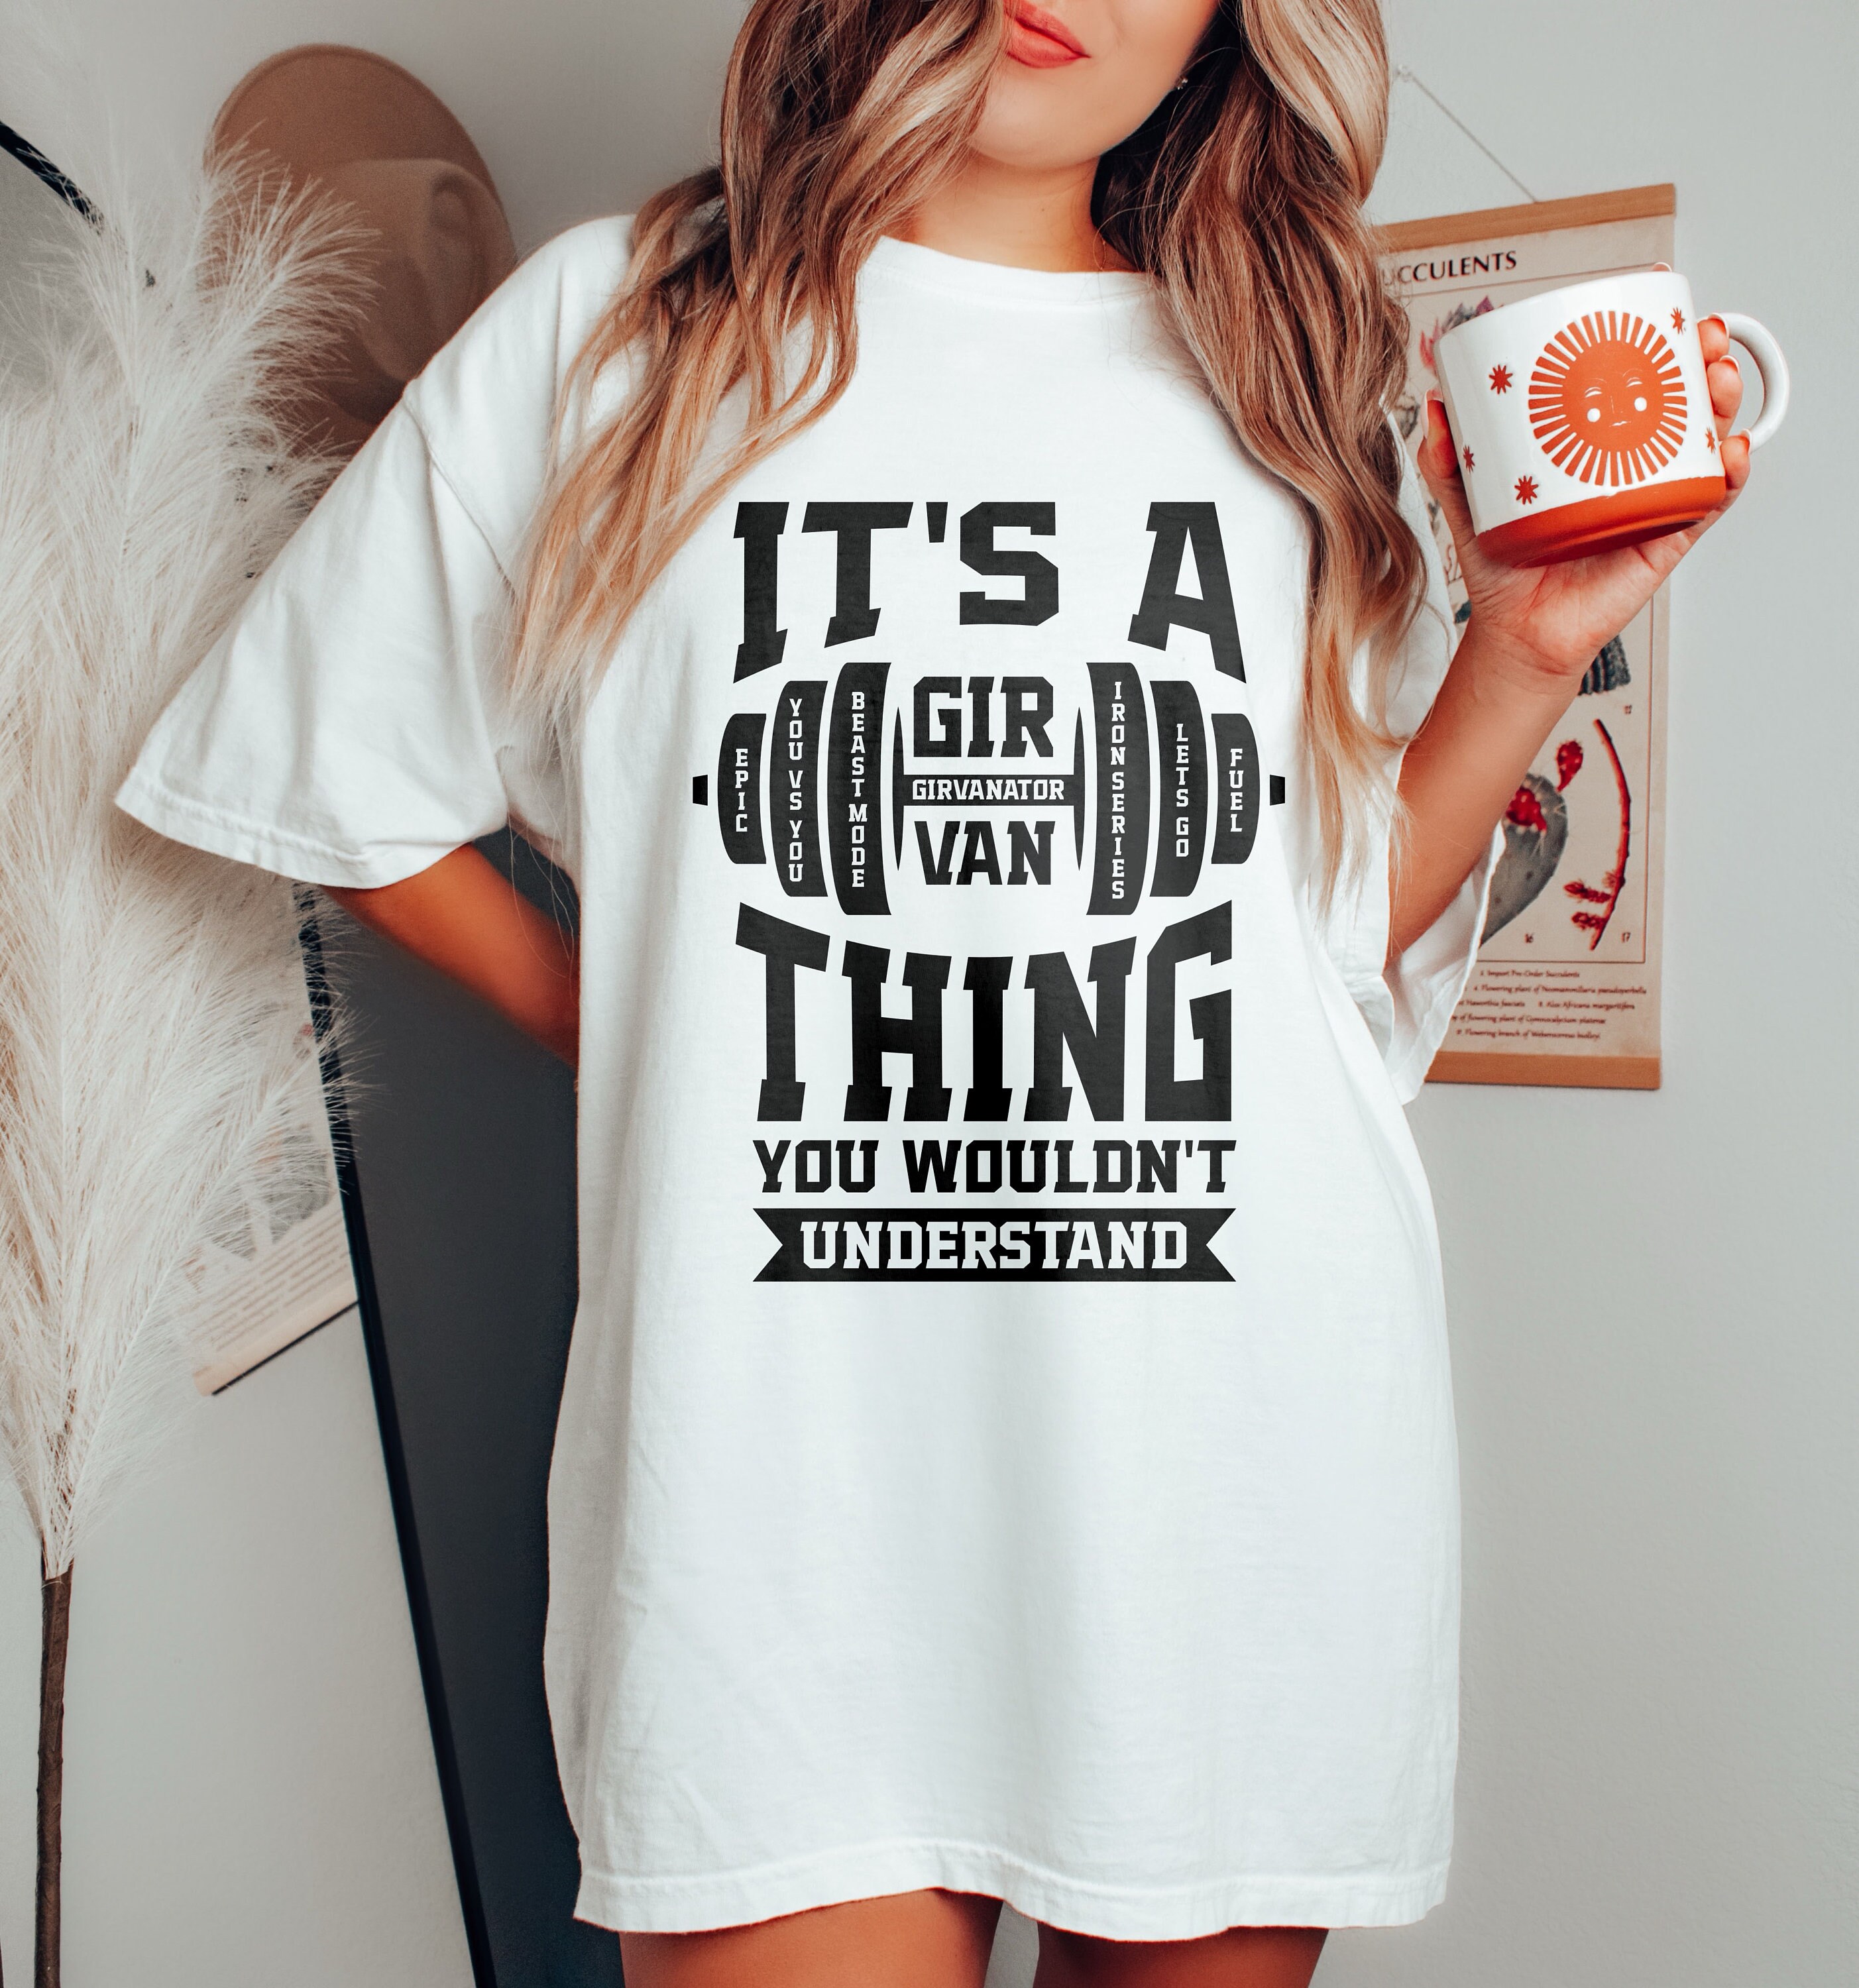 Buy Caroline Girvan, It's a Girvan Thing You Wouldn't Understand,  Girvanator, Iron Series, Fuel, Heat, Epic End Games, Gift for Her, Fitness  Tee Online in India 